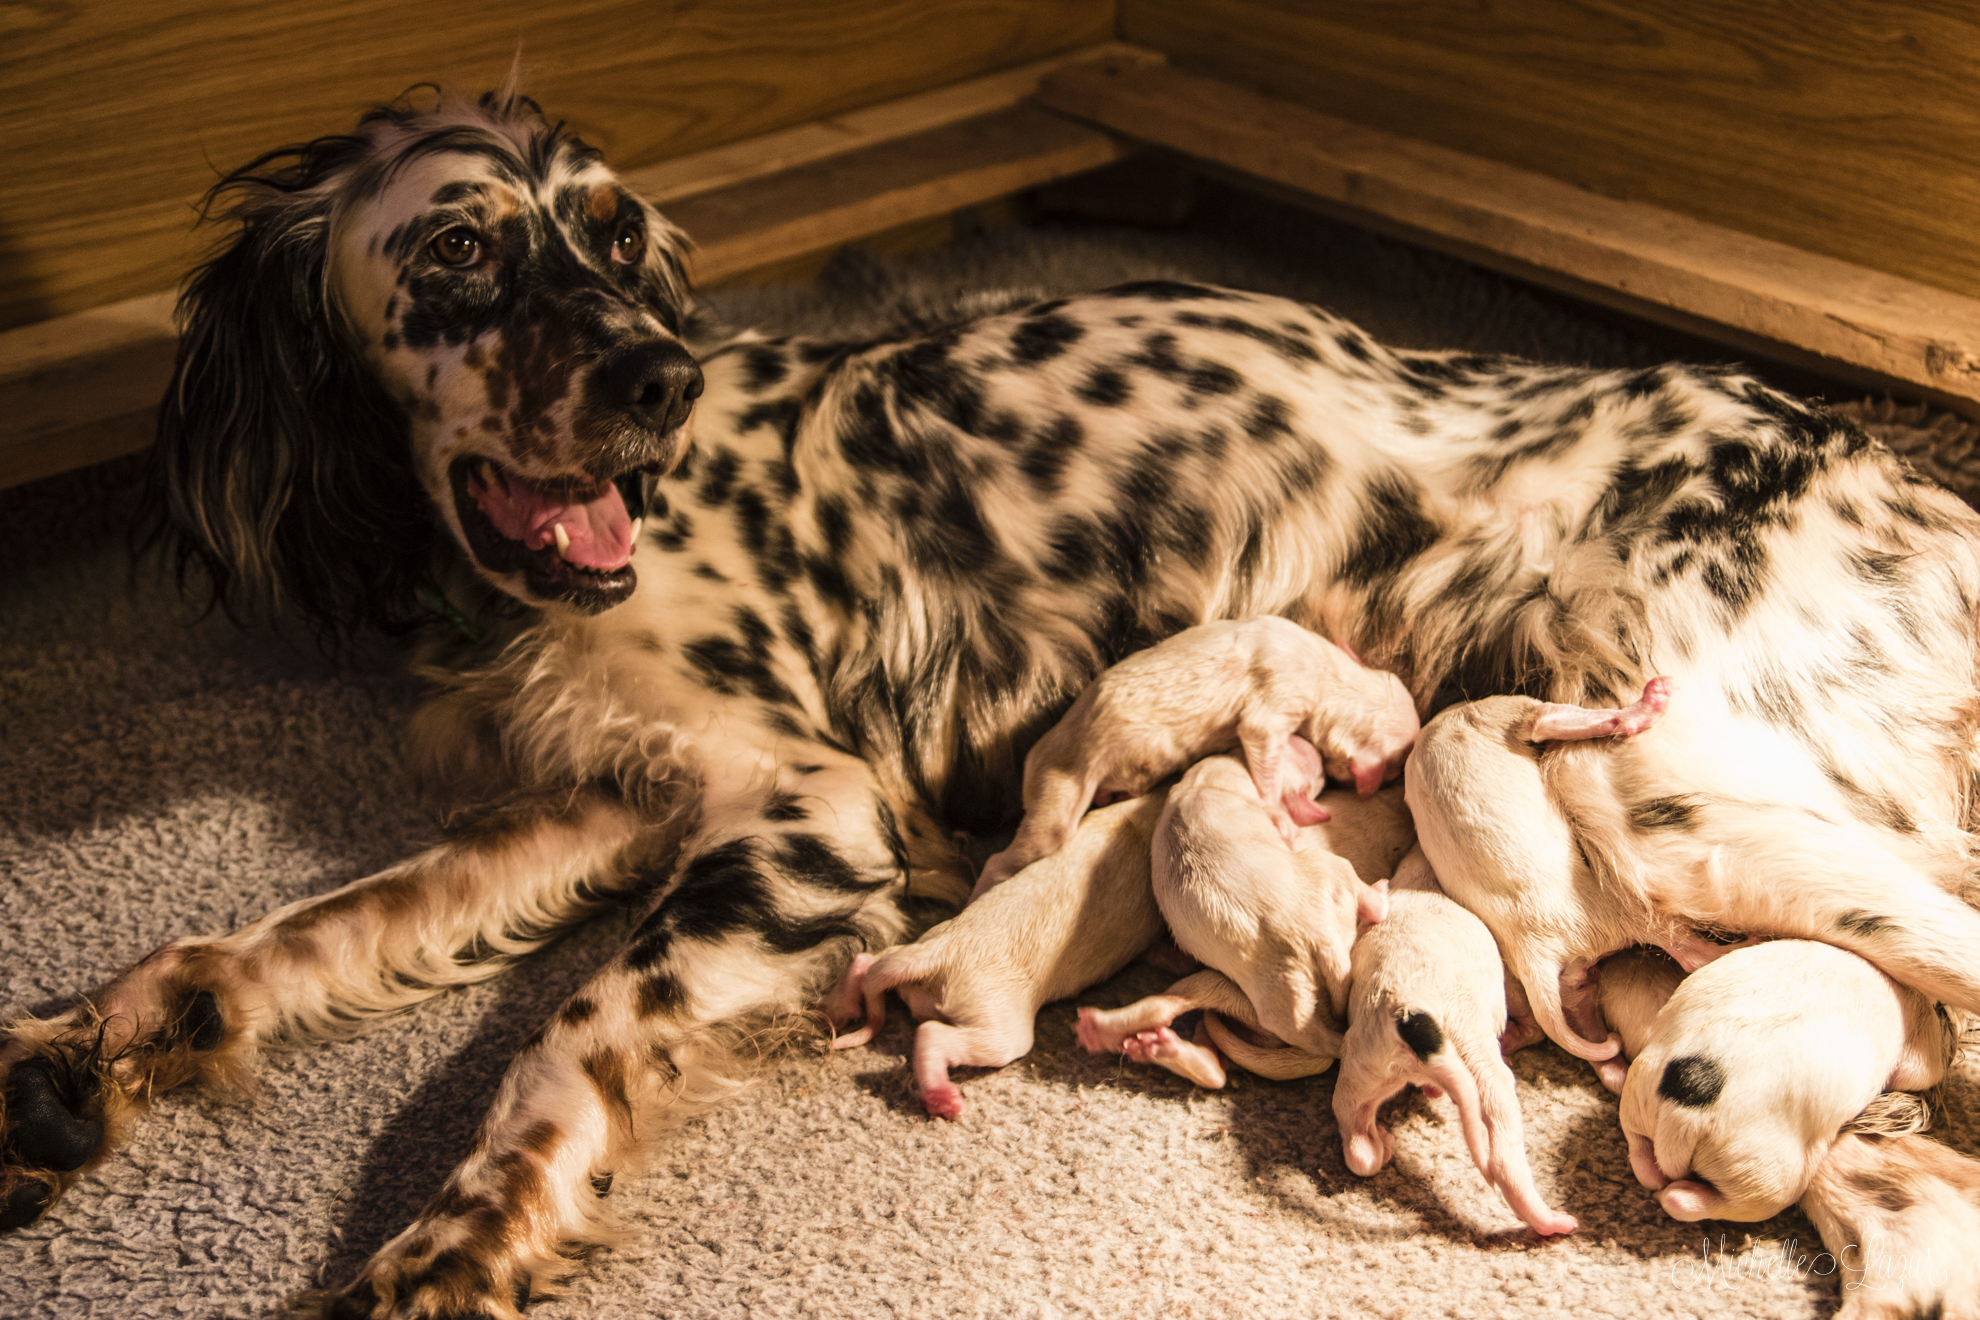 Llewellin Setters, Mia & Count Puppies - 20151116-_80A5704